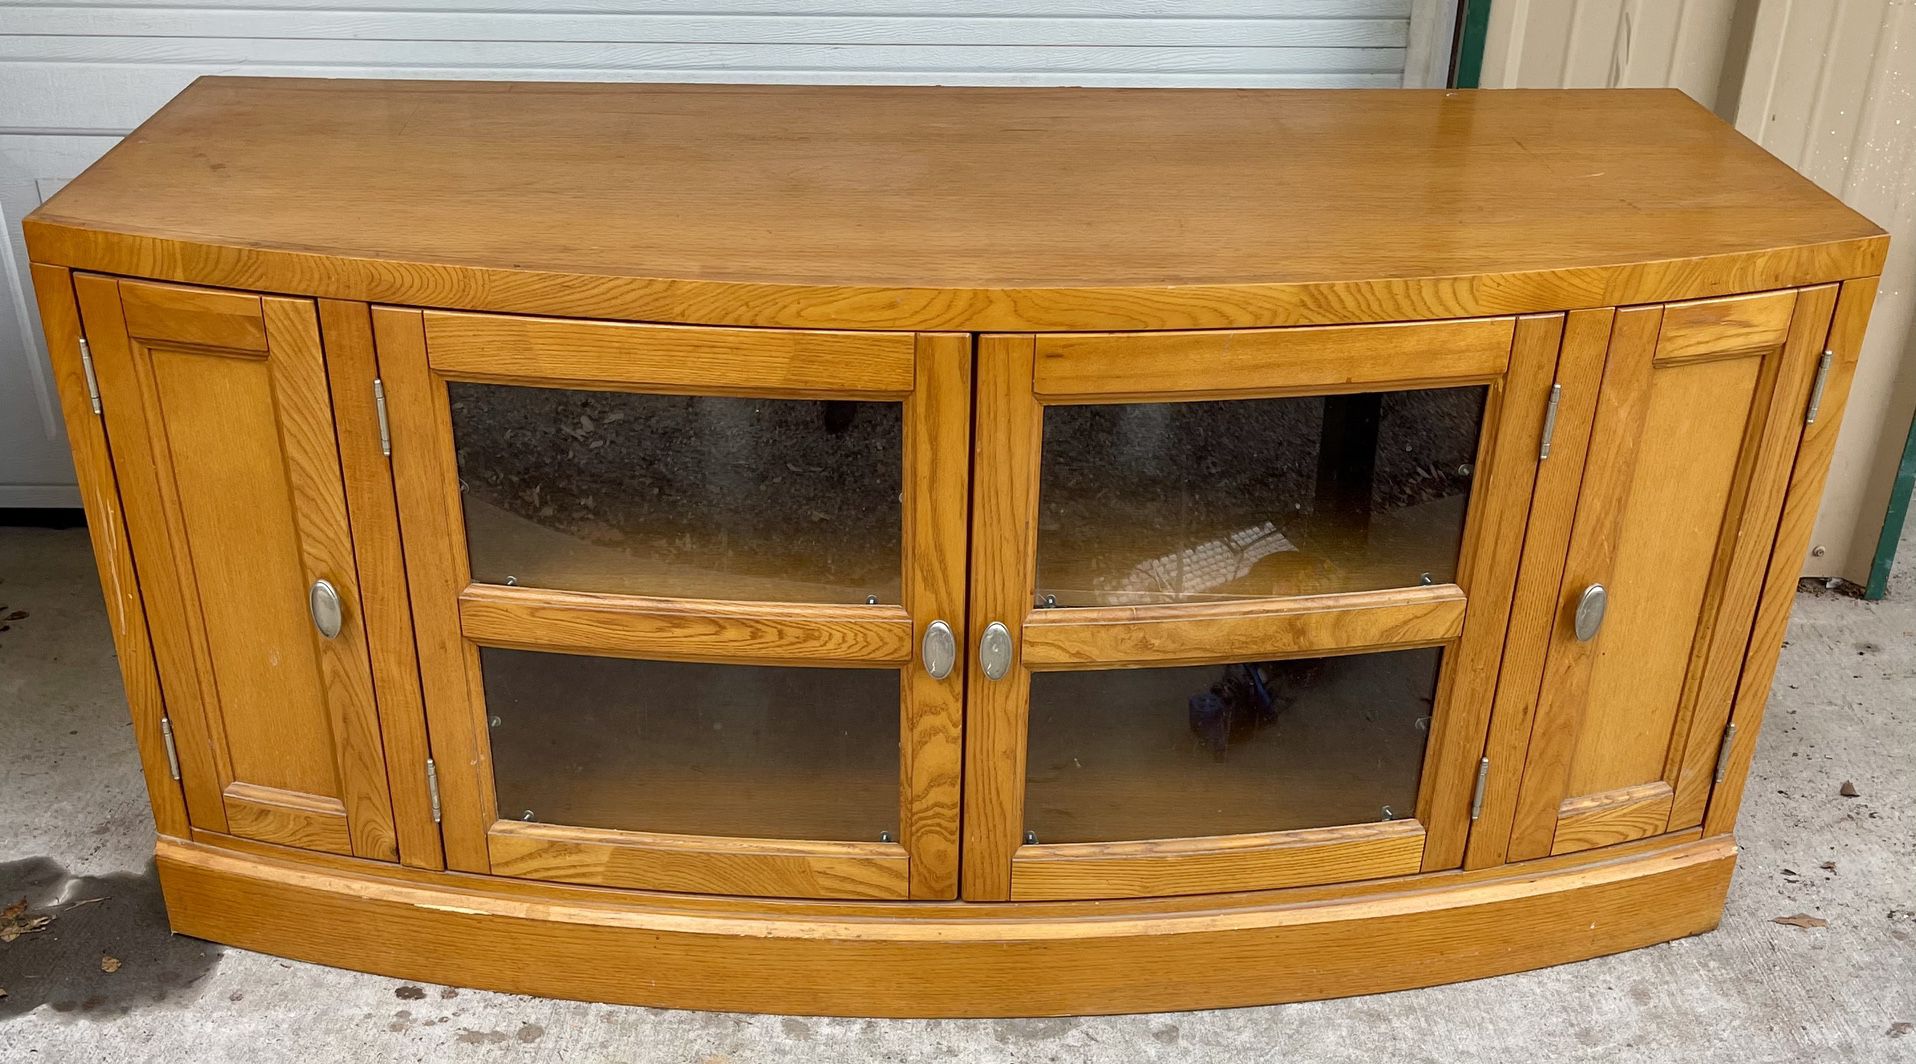 Solid wood Entertainment Center 